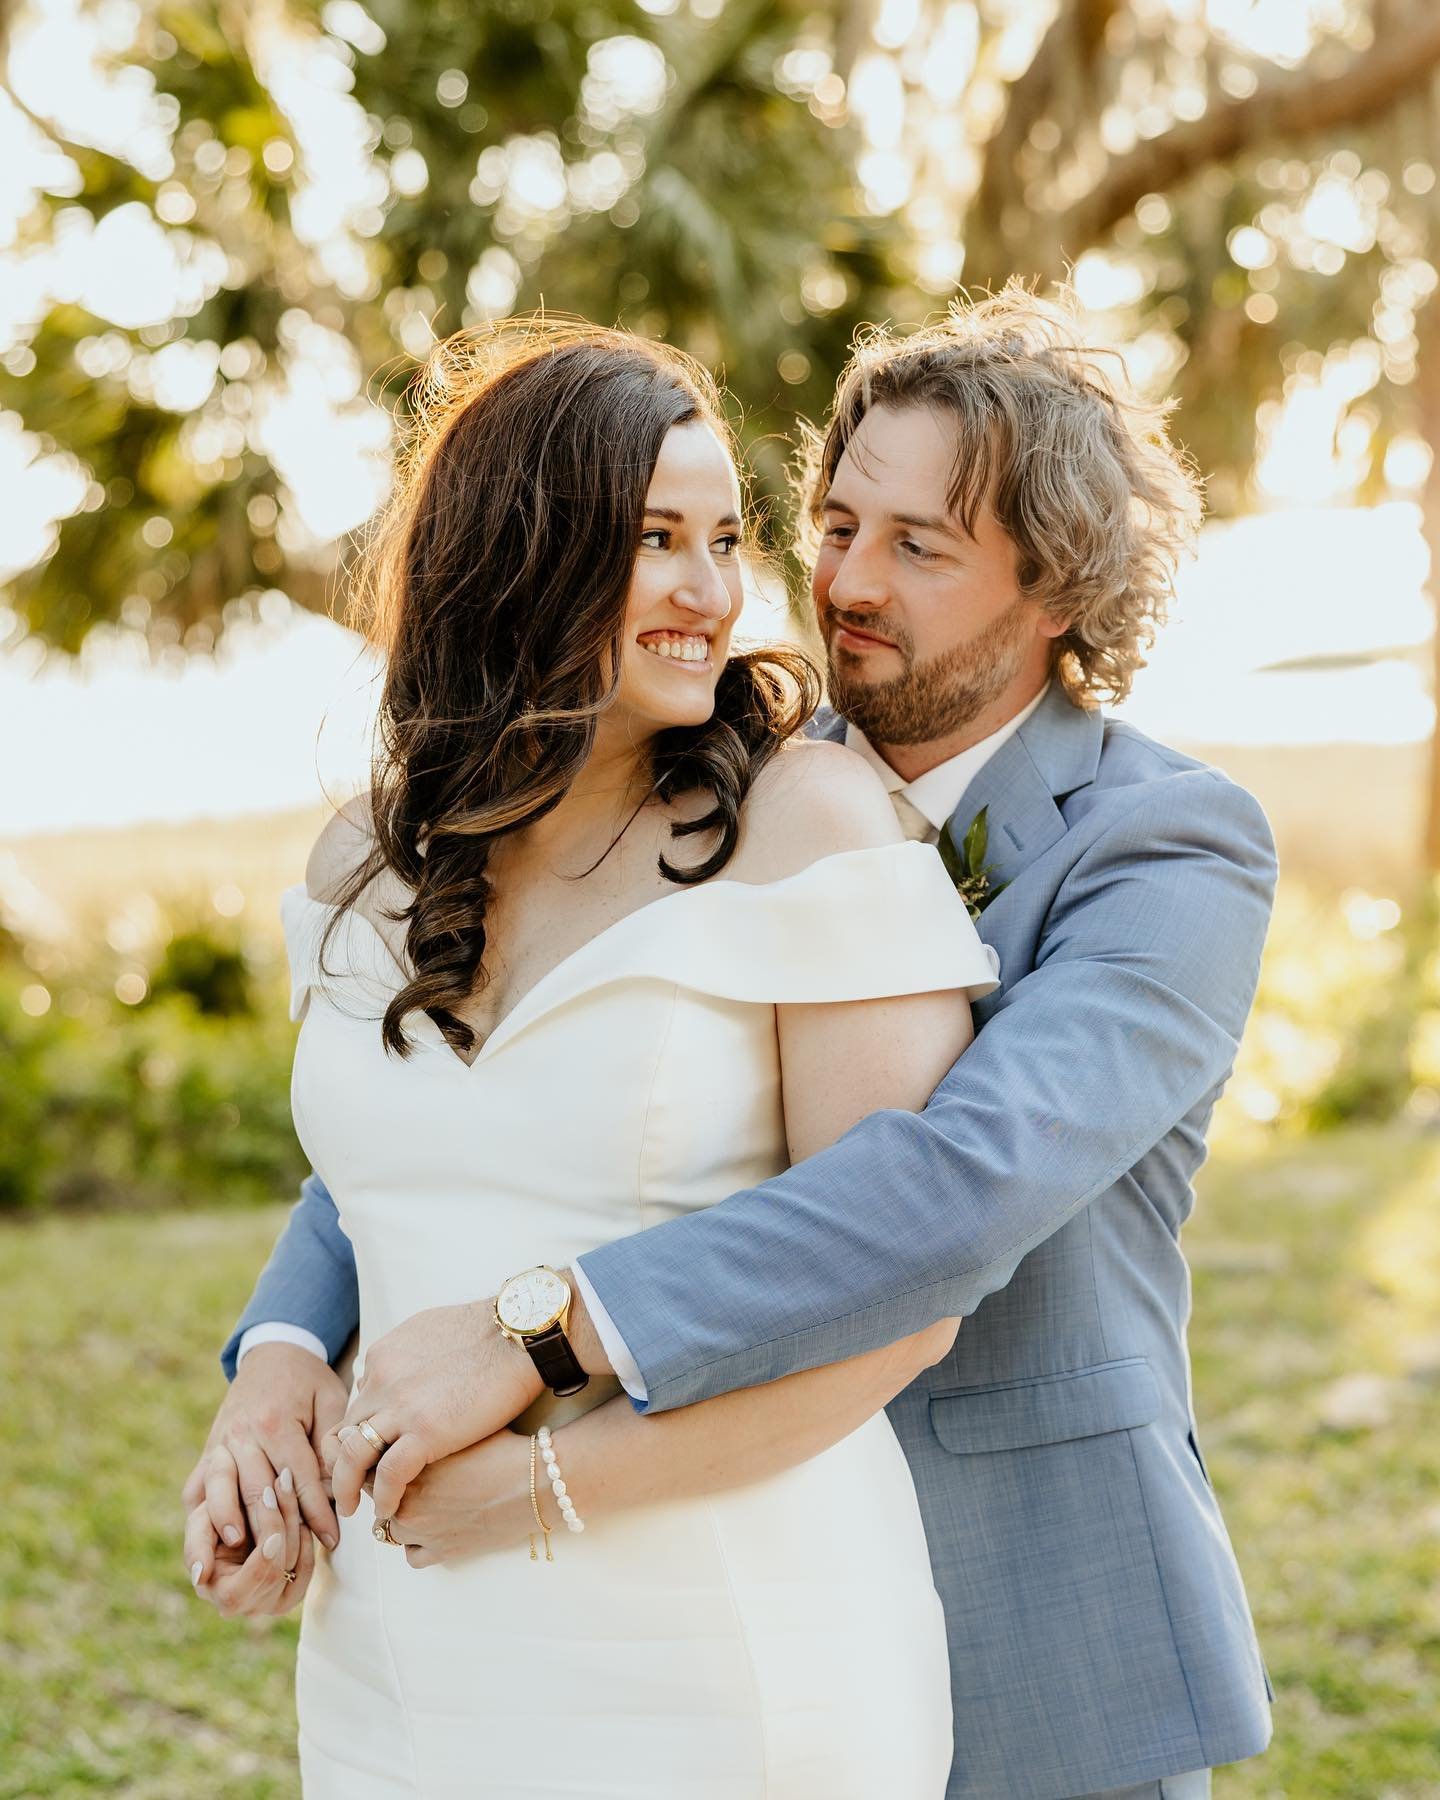 Some sneak peaks from the most beautiful Jekyll Island wedding this weekend that I just can&rsquo;t get over 🤩 this wedding is was so full of love and fun and the pictures are so incredible. Here&rsquo;s to the Dudley&rsquo;s!